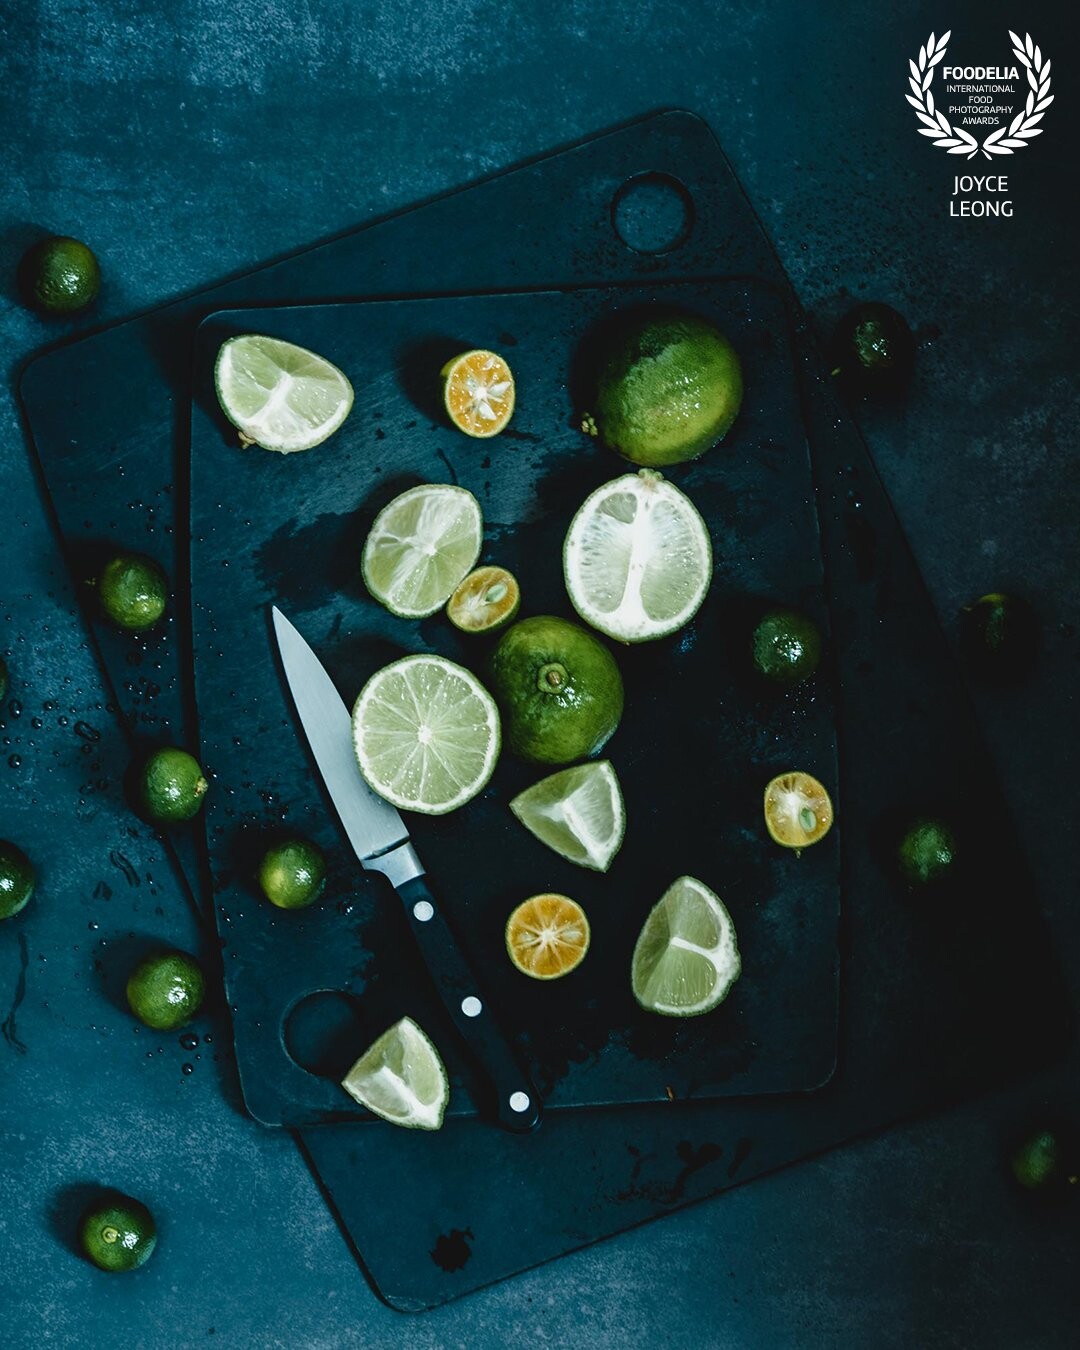 Fresh limes with water droplets coupled with a moody edit was the look I was going for. Used limes of various sizes and cut differently to make it more visually interesting.